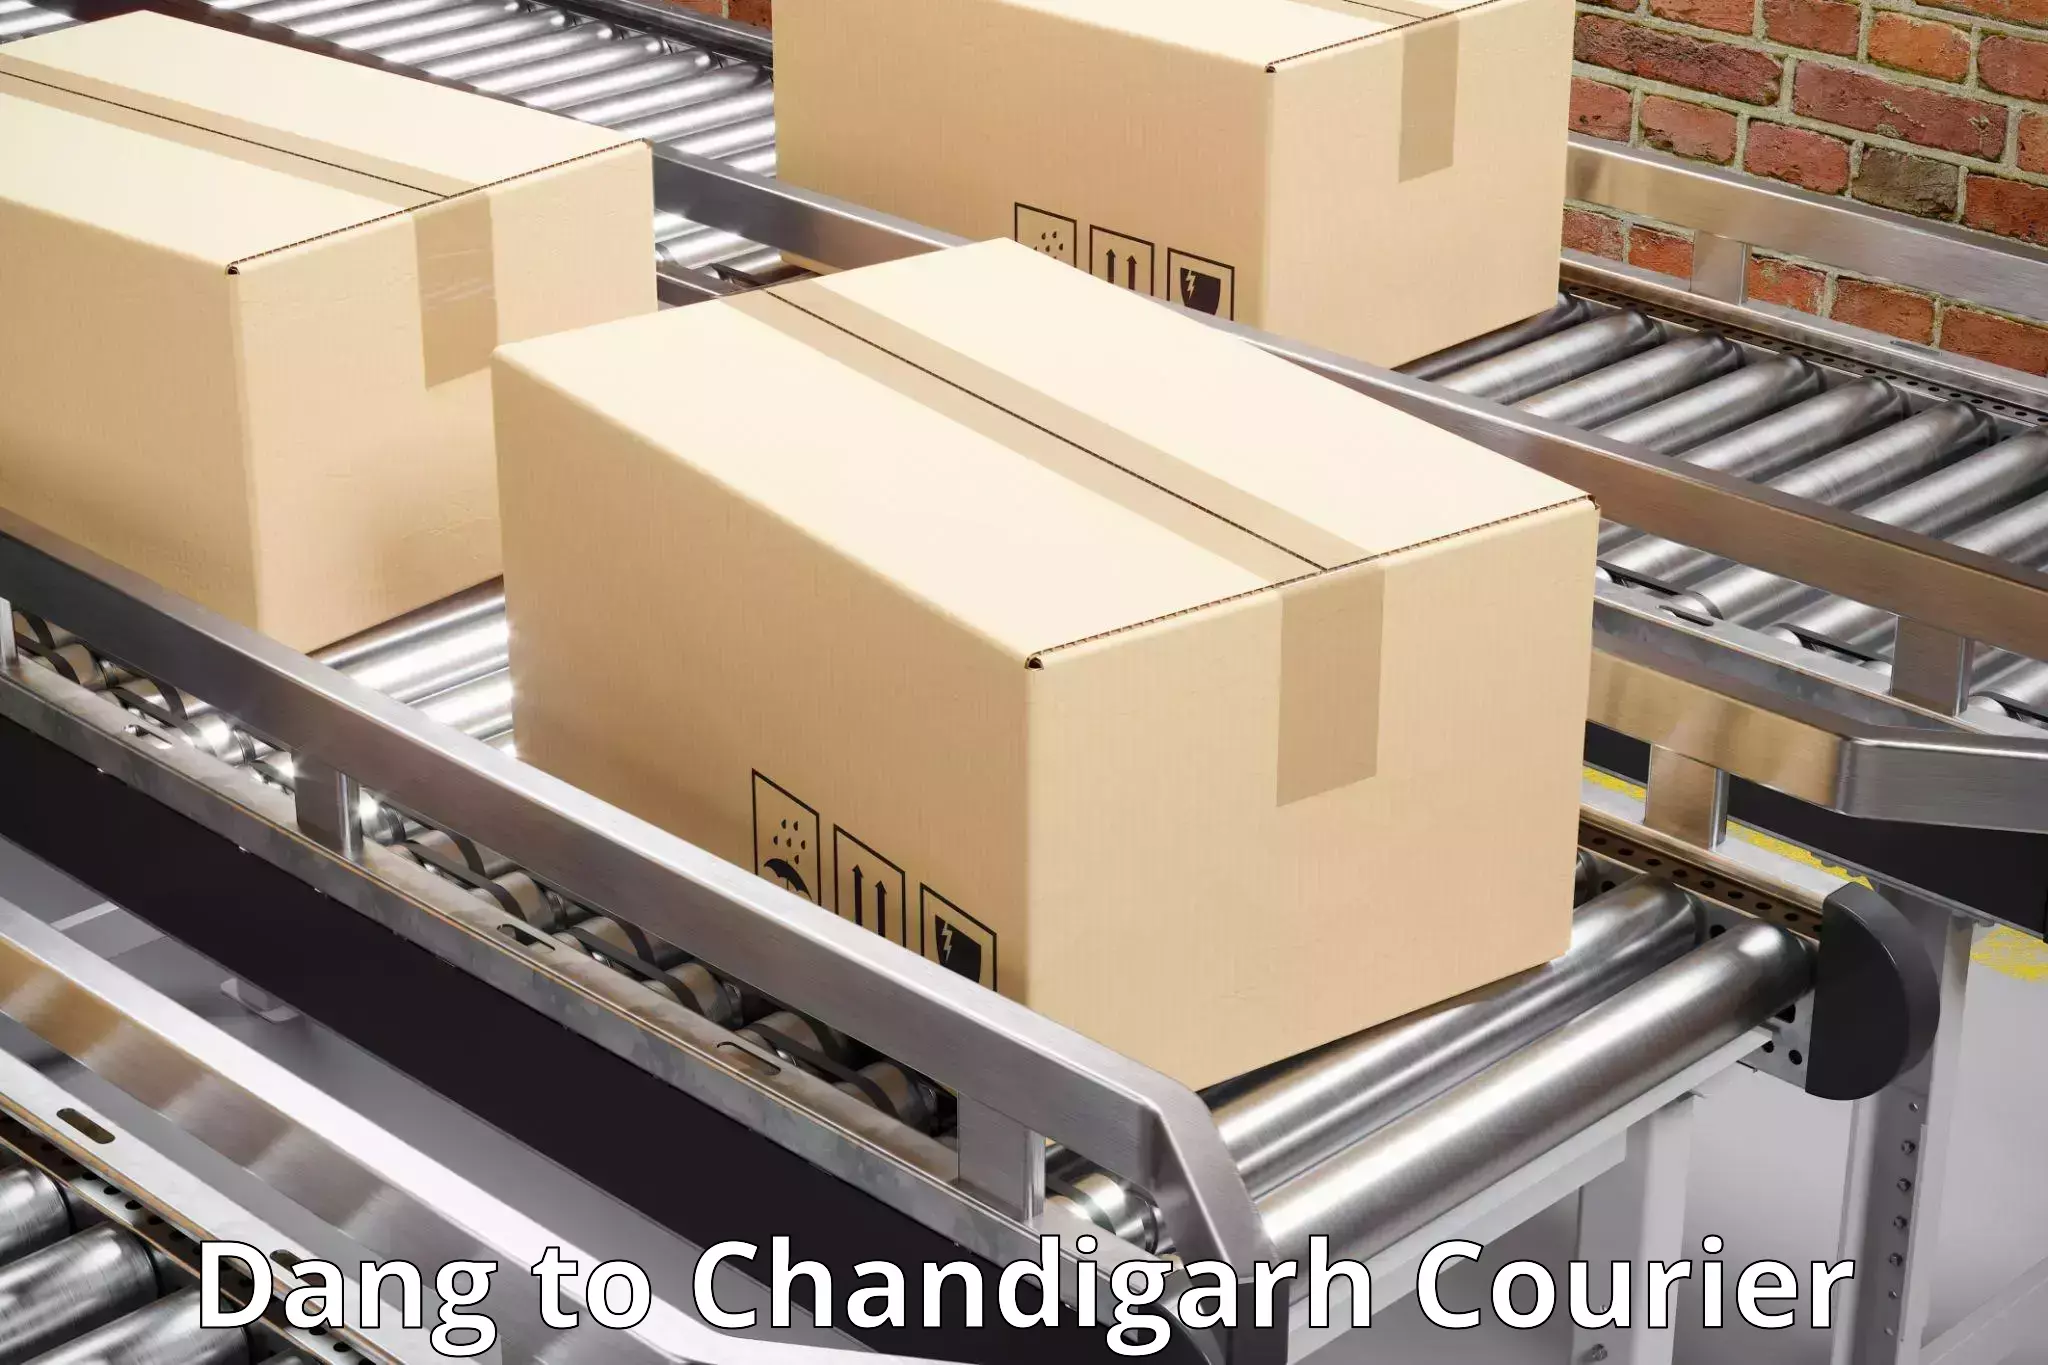 Courier app Dang to Chandigarh